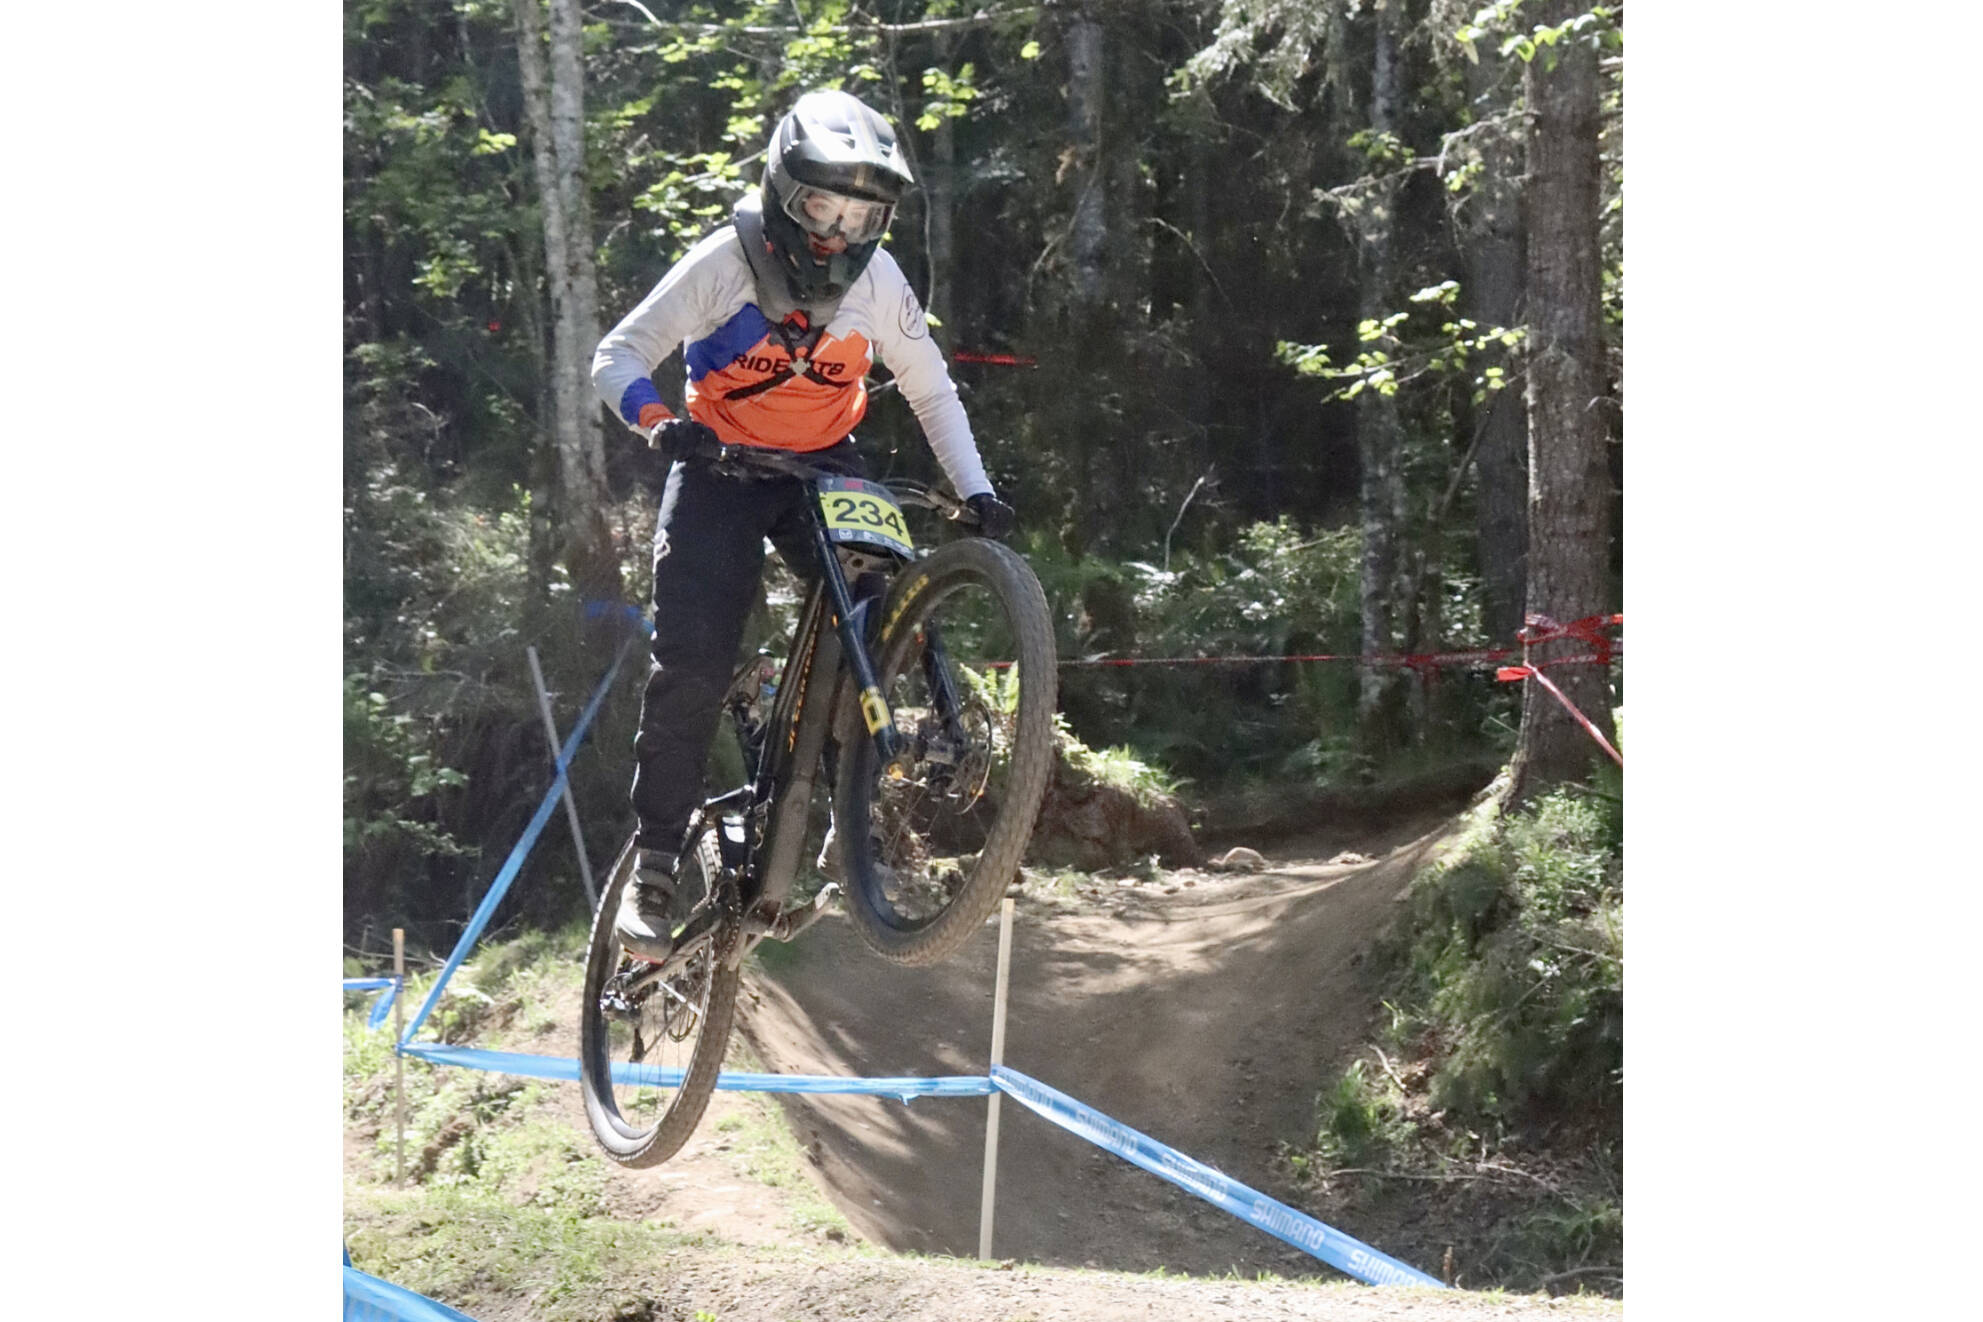 Ollie Thibault of Shawnigan Lake, B.C., competes in the NW Cup mountain biking downhill race at Dry Hill on Sunday. More than 500 racers took up the challenge on the Dry Hill courses this weekend. (Dave Logan/for Peninsula Daily News)